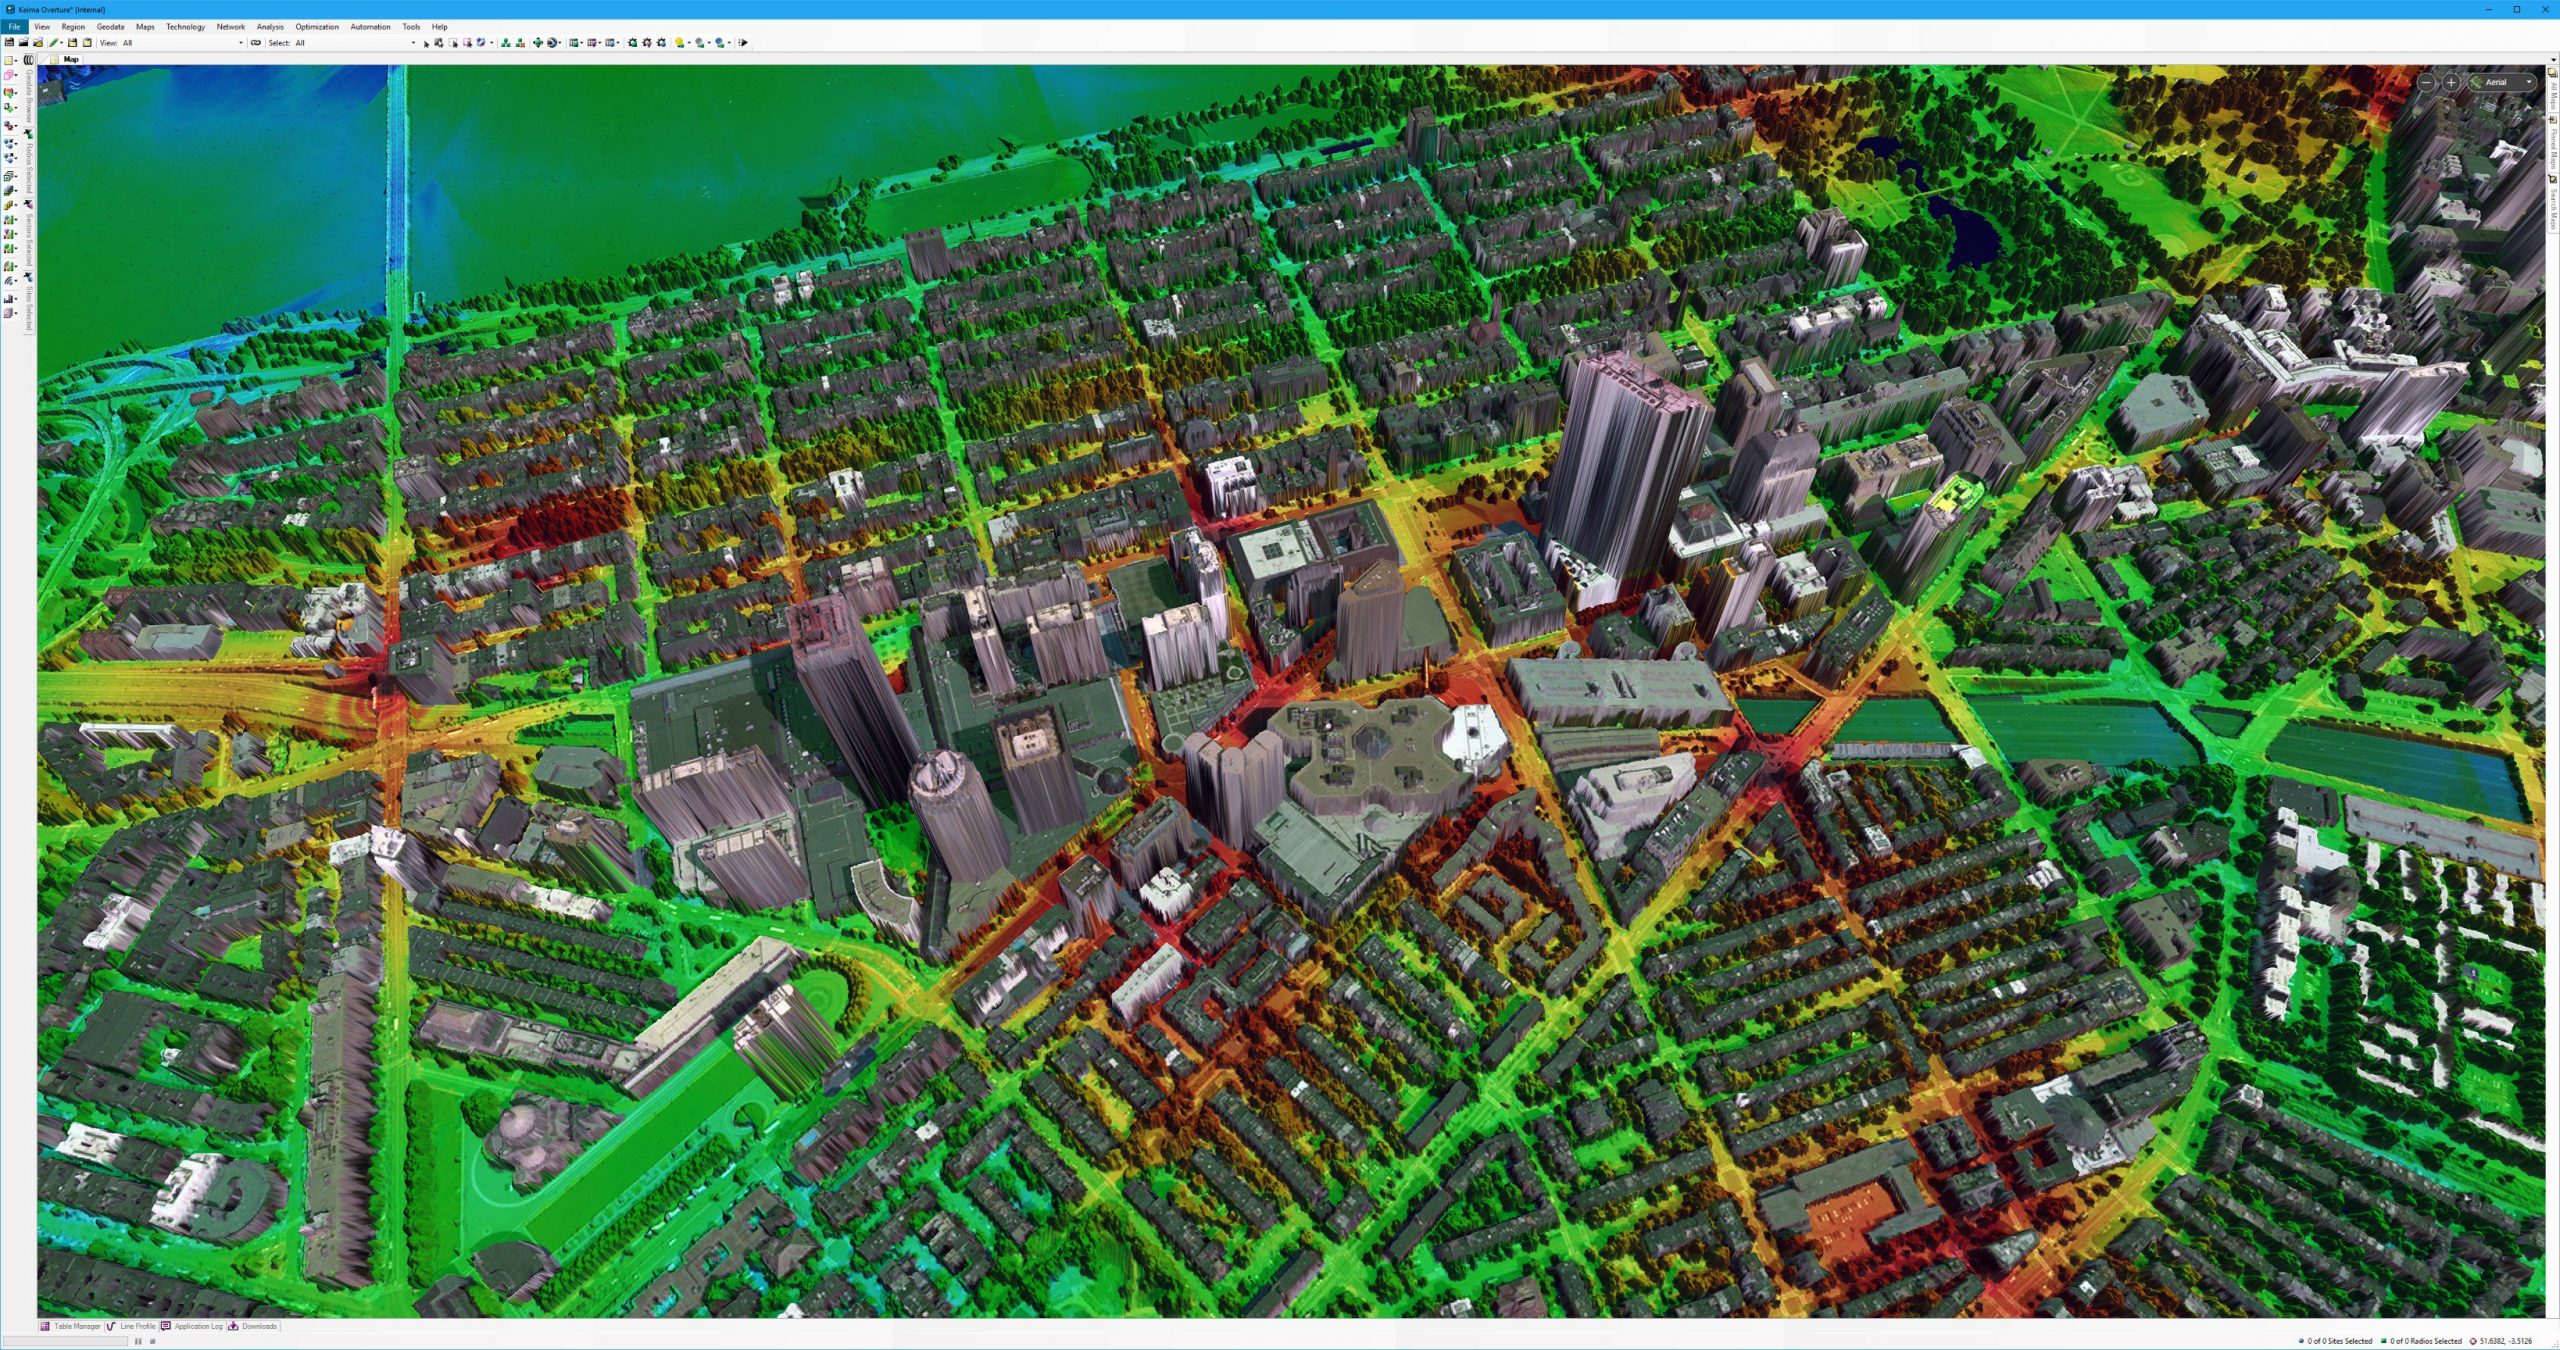 How is the visualisation of geospatial data done? 